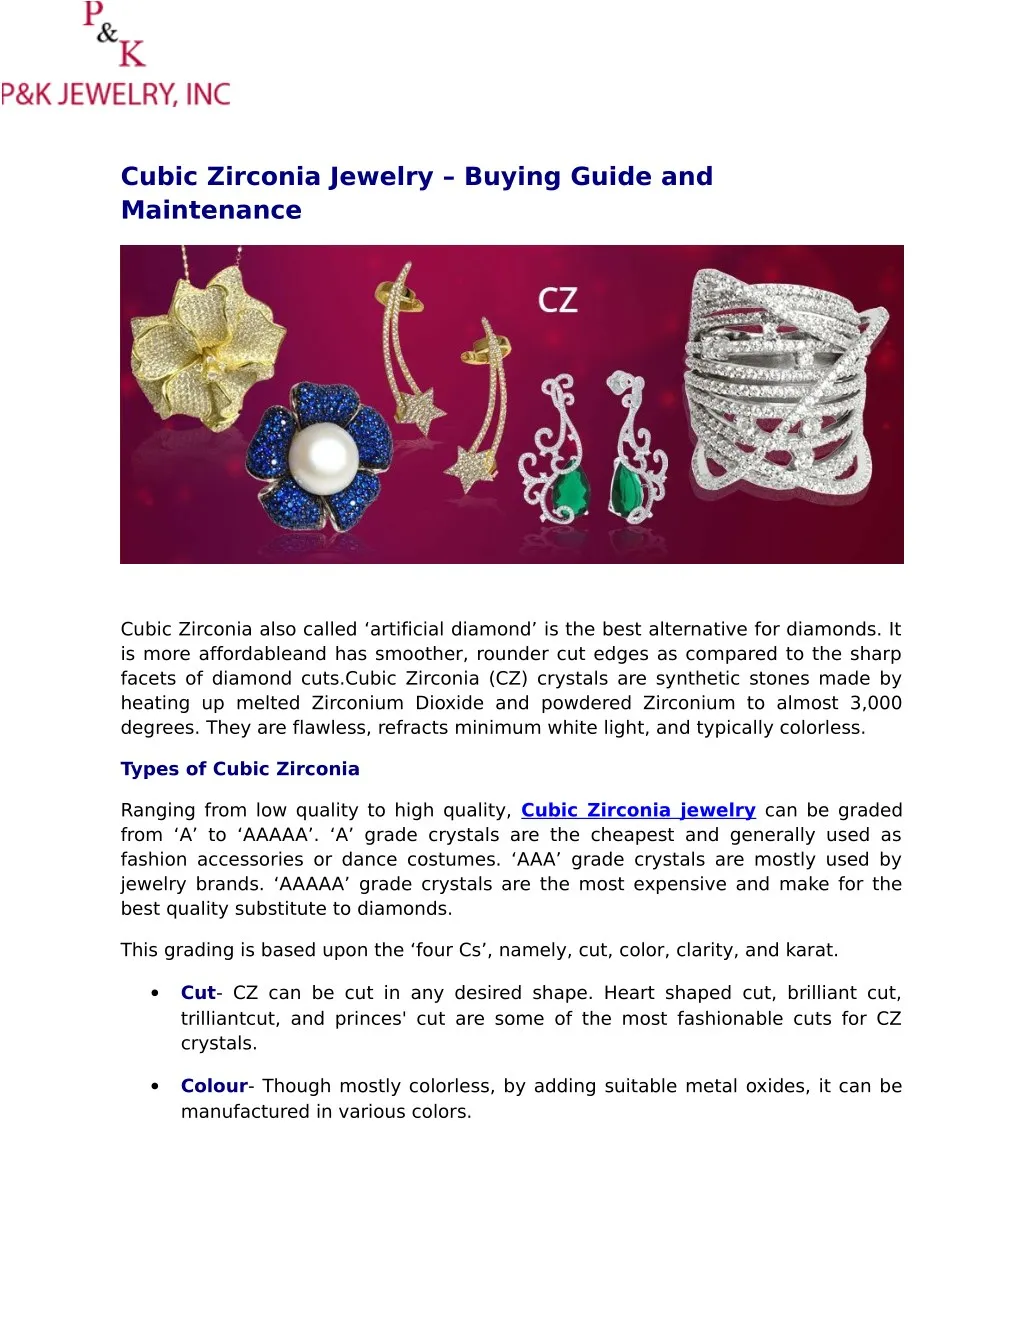 cubic zirconia jewelry buying guide